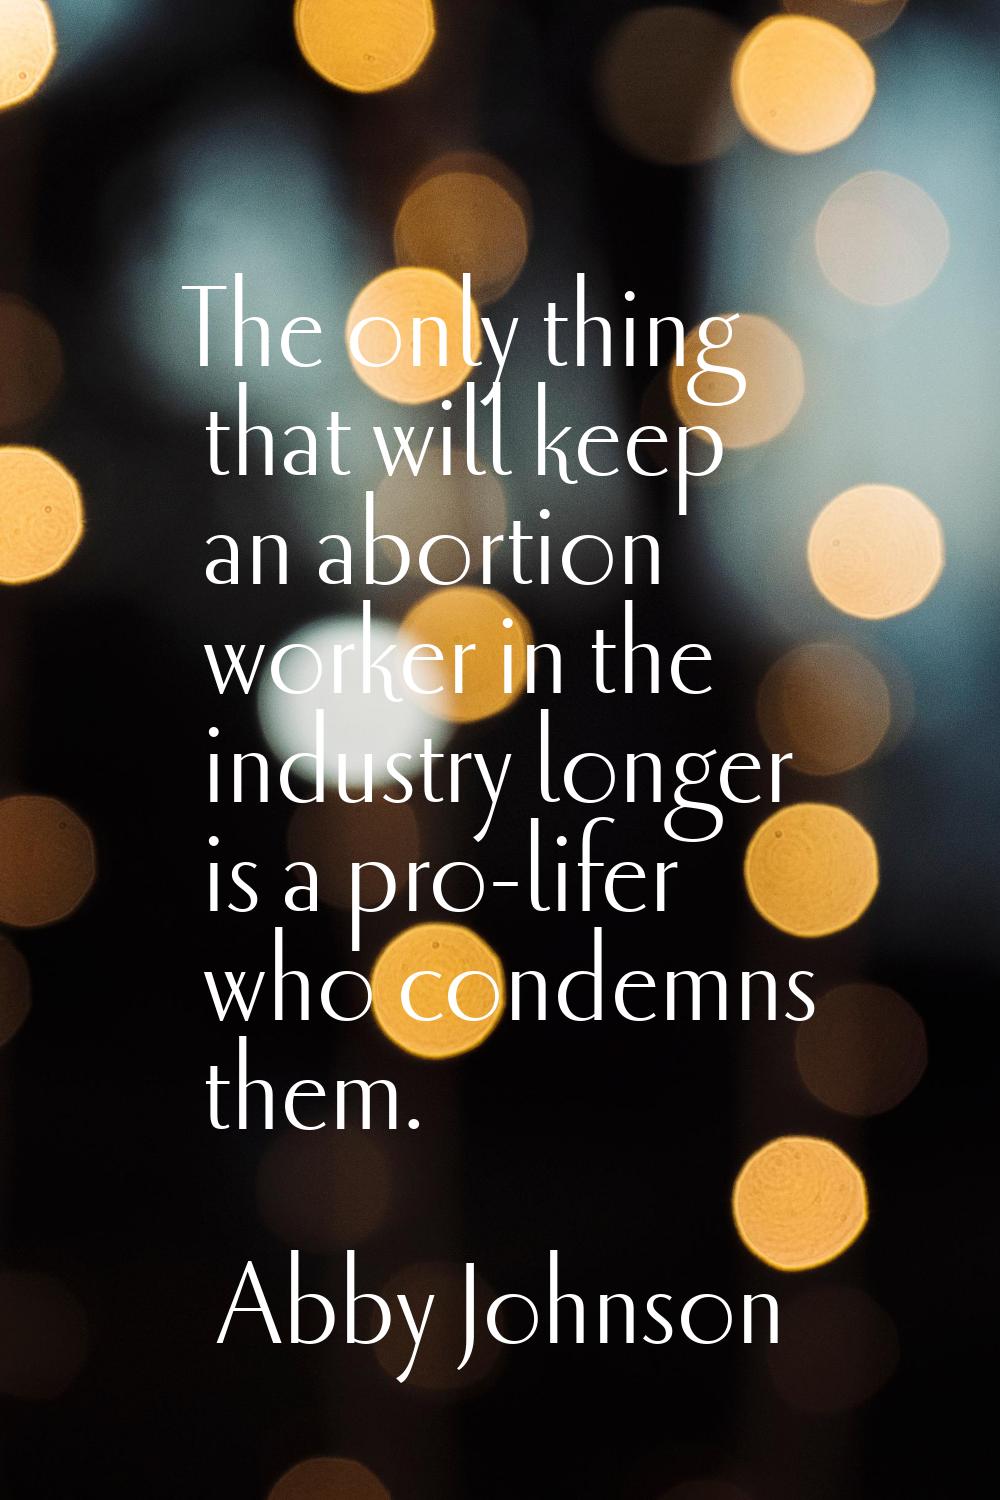 The only thing that will keep an abortion worker in the industry longer is a pro-lifer who condemns